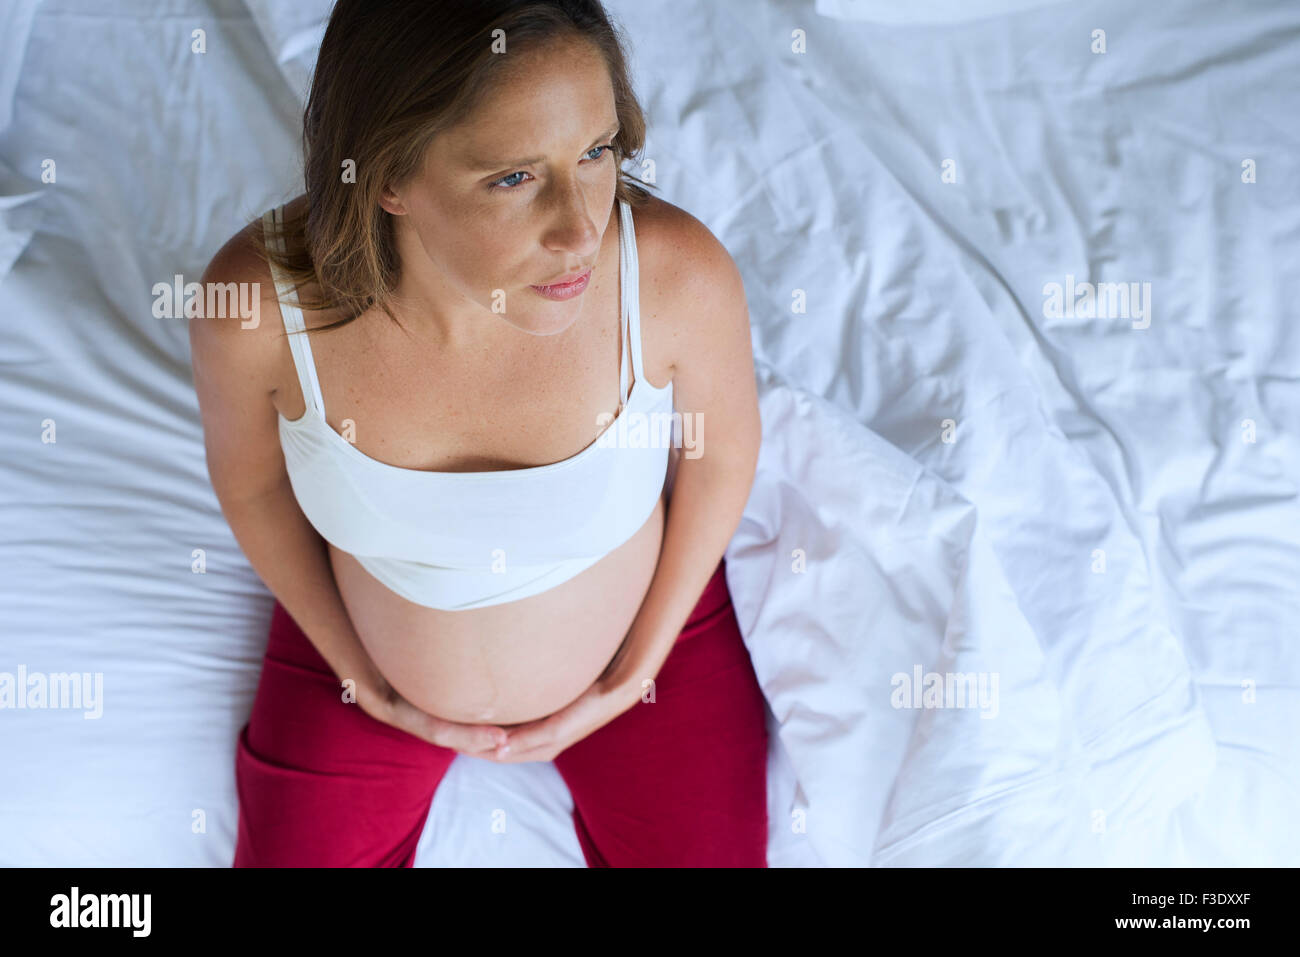 Pregnant woman sitting on bed with hands on stomach Stock Photo